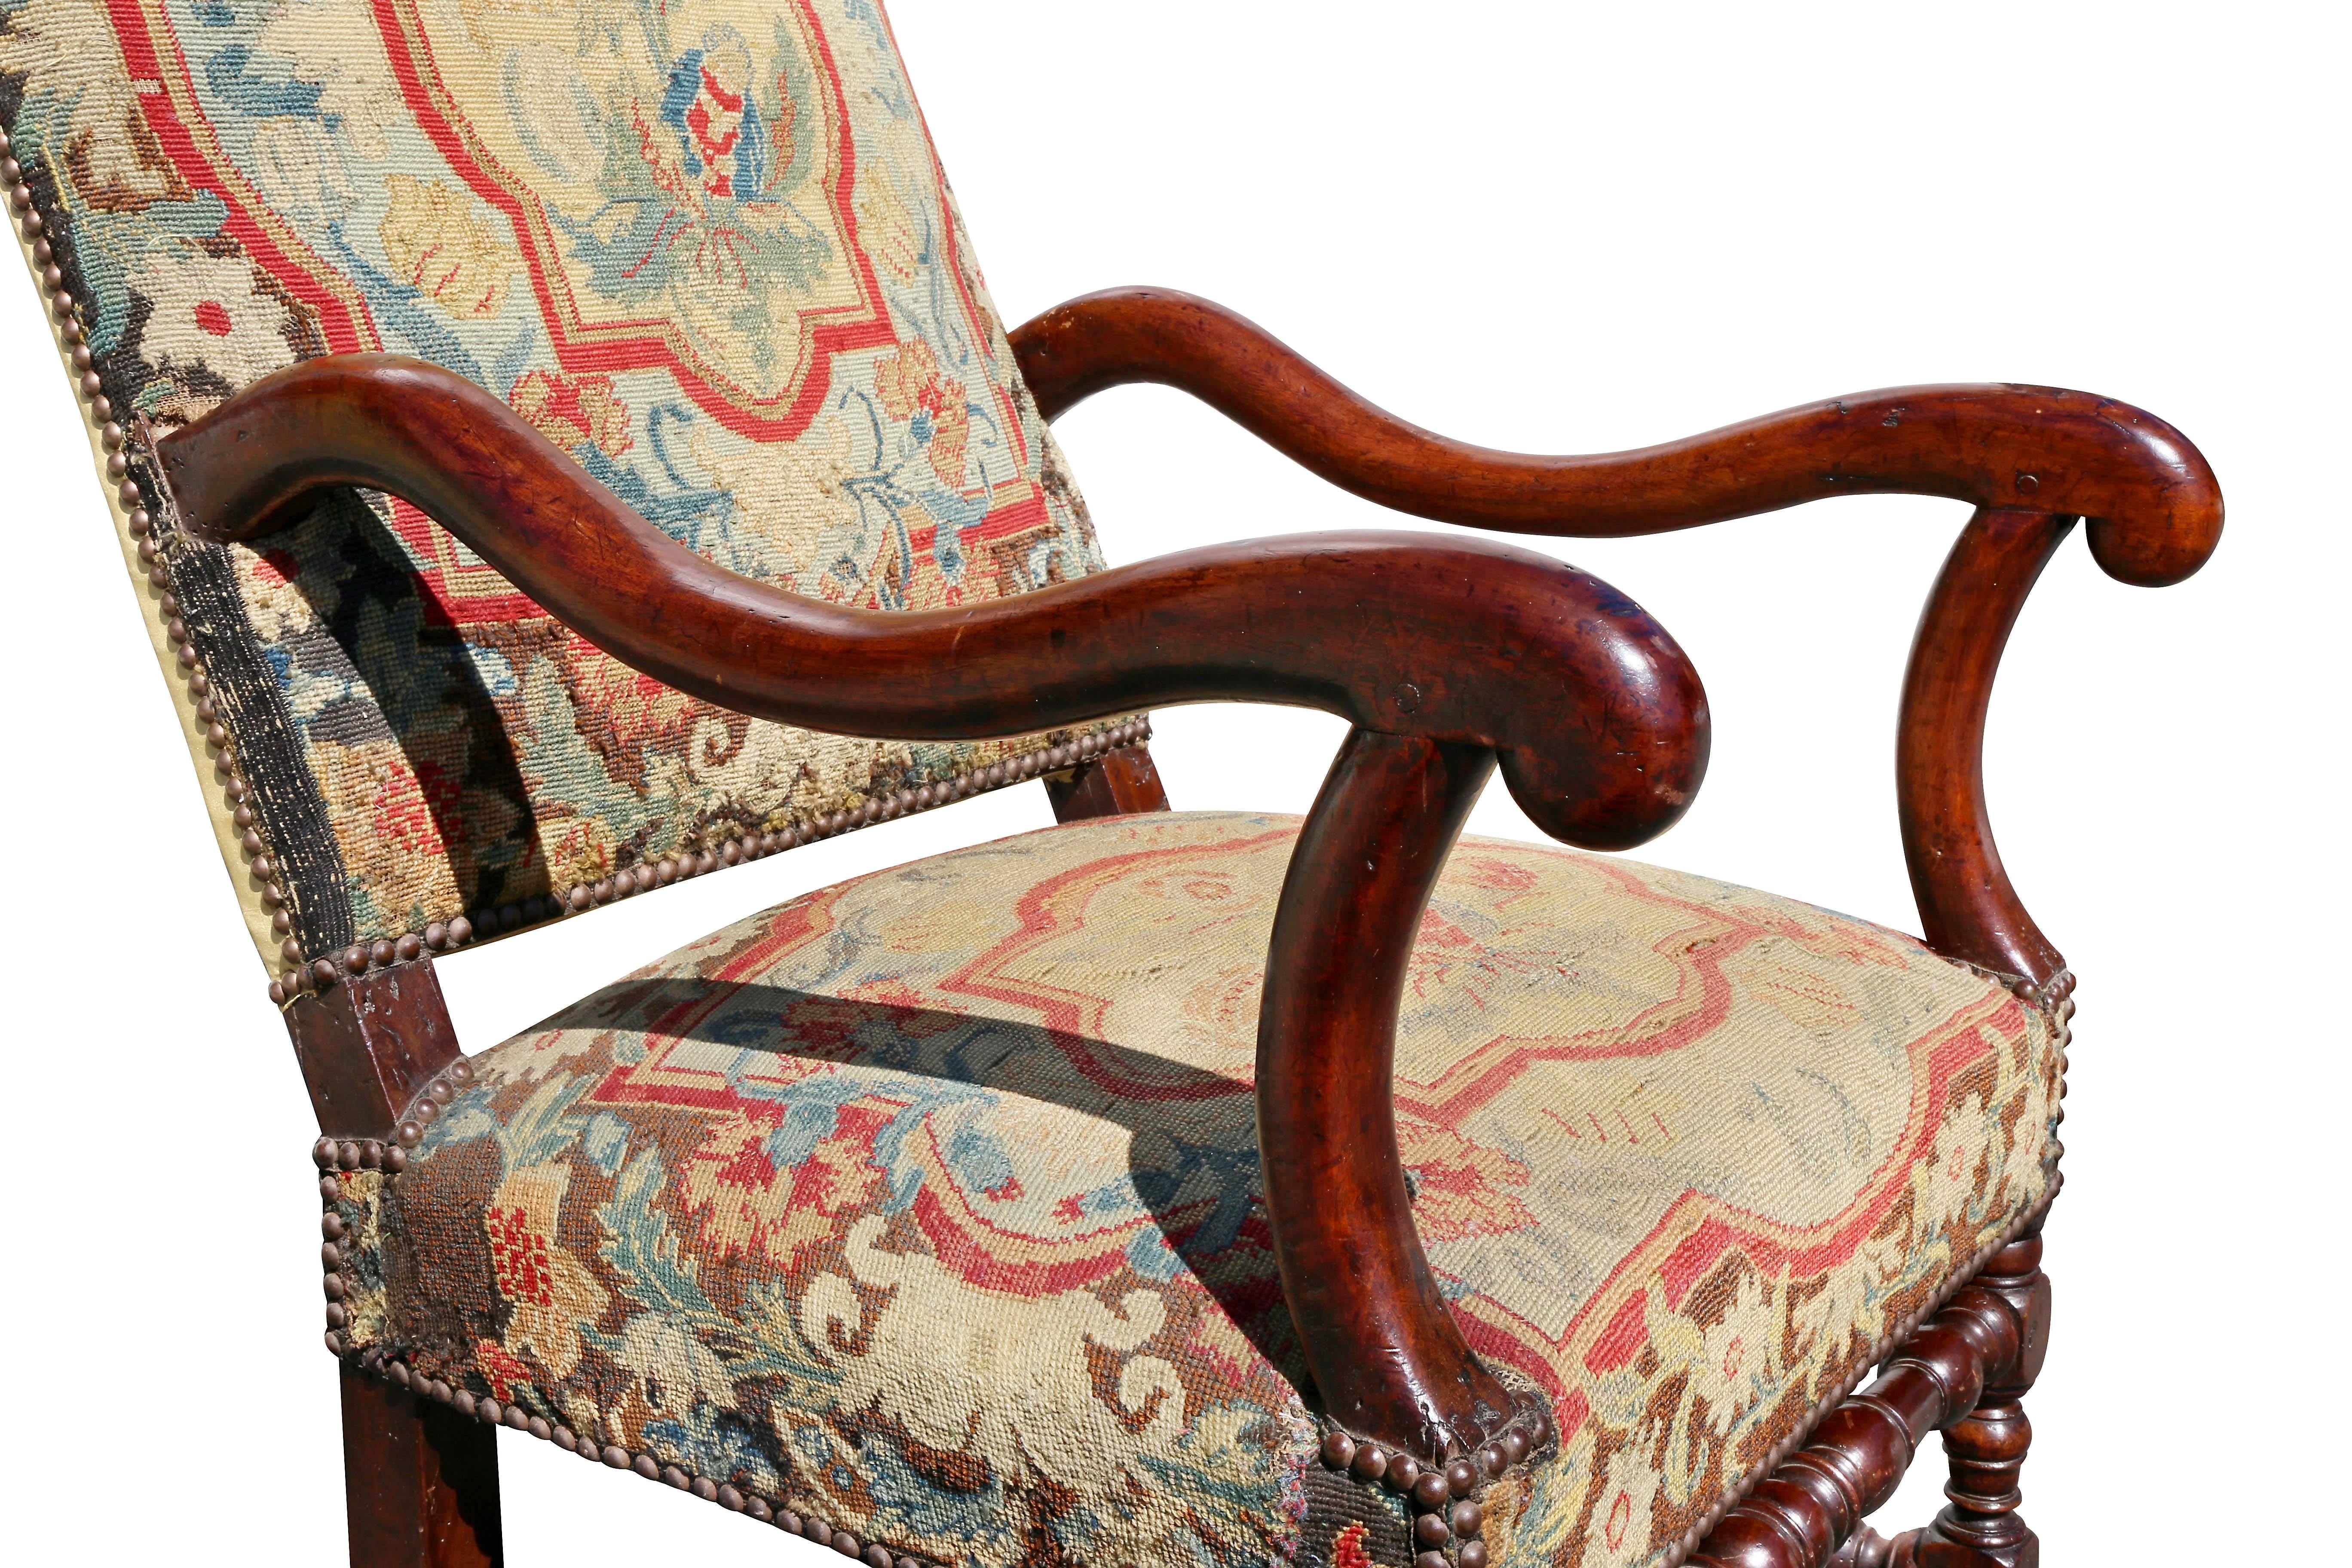 With arched needlepoint back and downswept curved arms, needlepoint seat raised on block and turned legs with conforming H form stretchers.